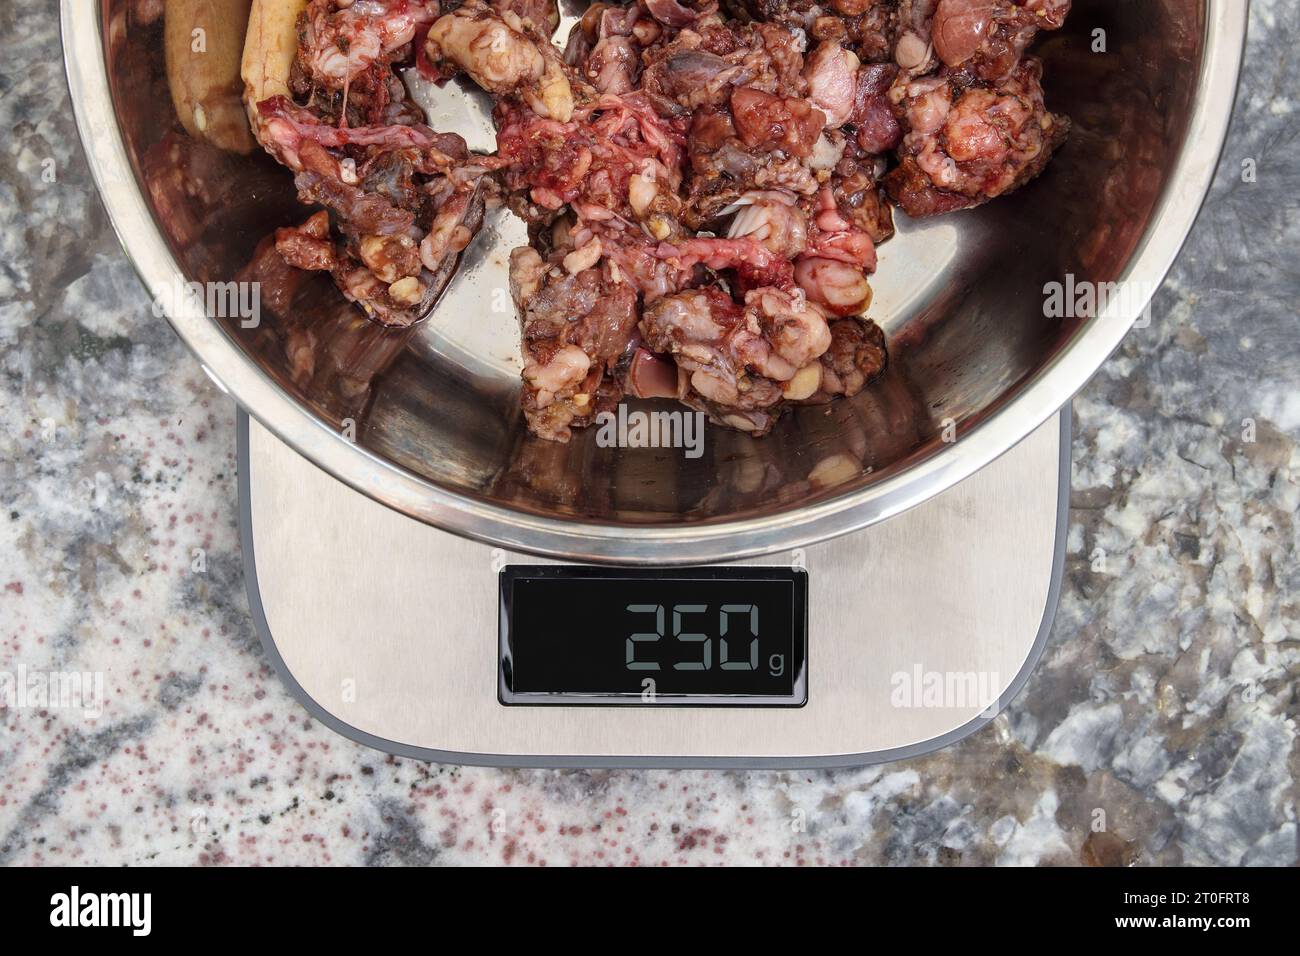 https://c8.alamy.com/comp/2T0FRT8/raw-ground-meat-on-food-scale-in-kitchen-top-view-measuring-portion-for-large-dog-on-raw-food-diet-or-barf-coarse-ground-beef-meat-with-muscle-bon-2T0FRT8.jpg